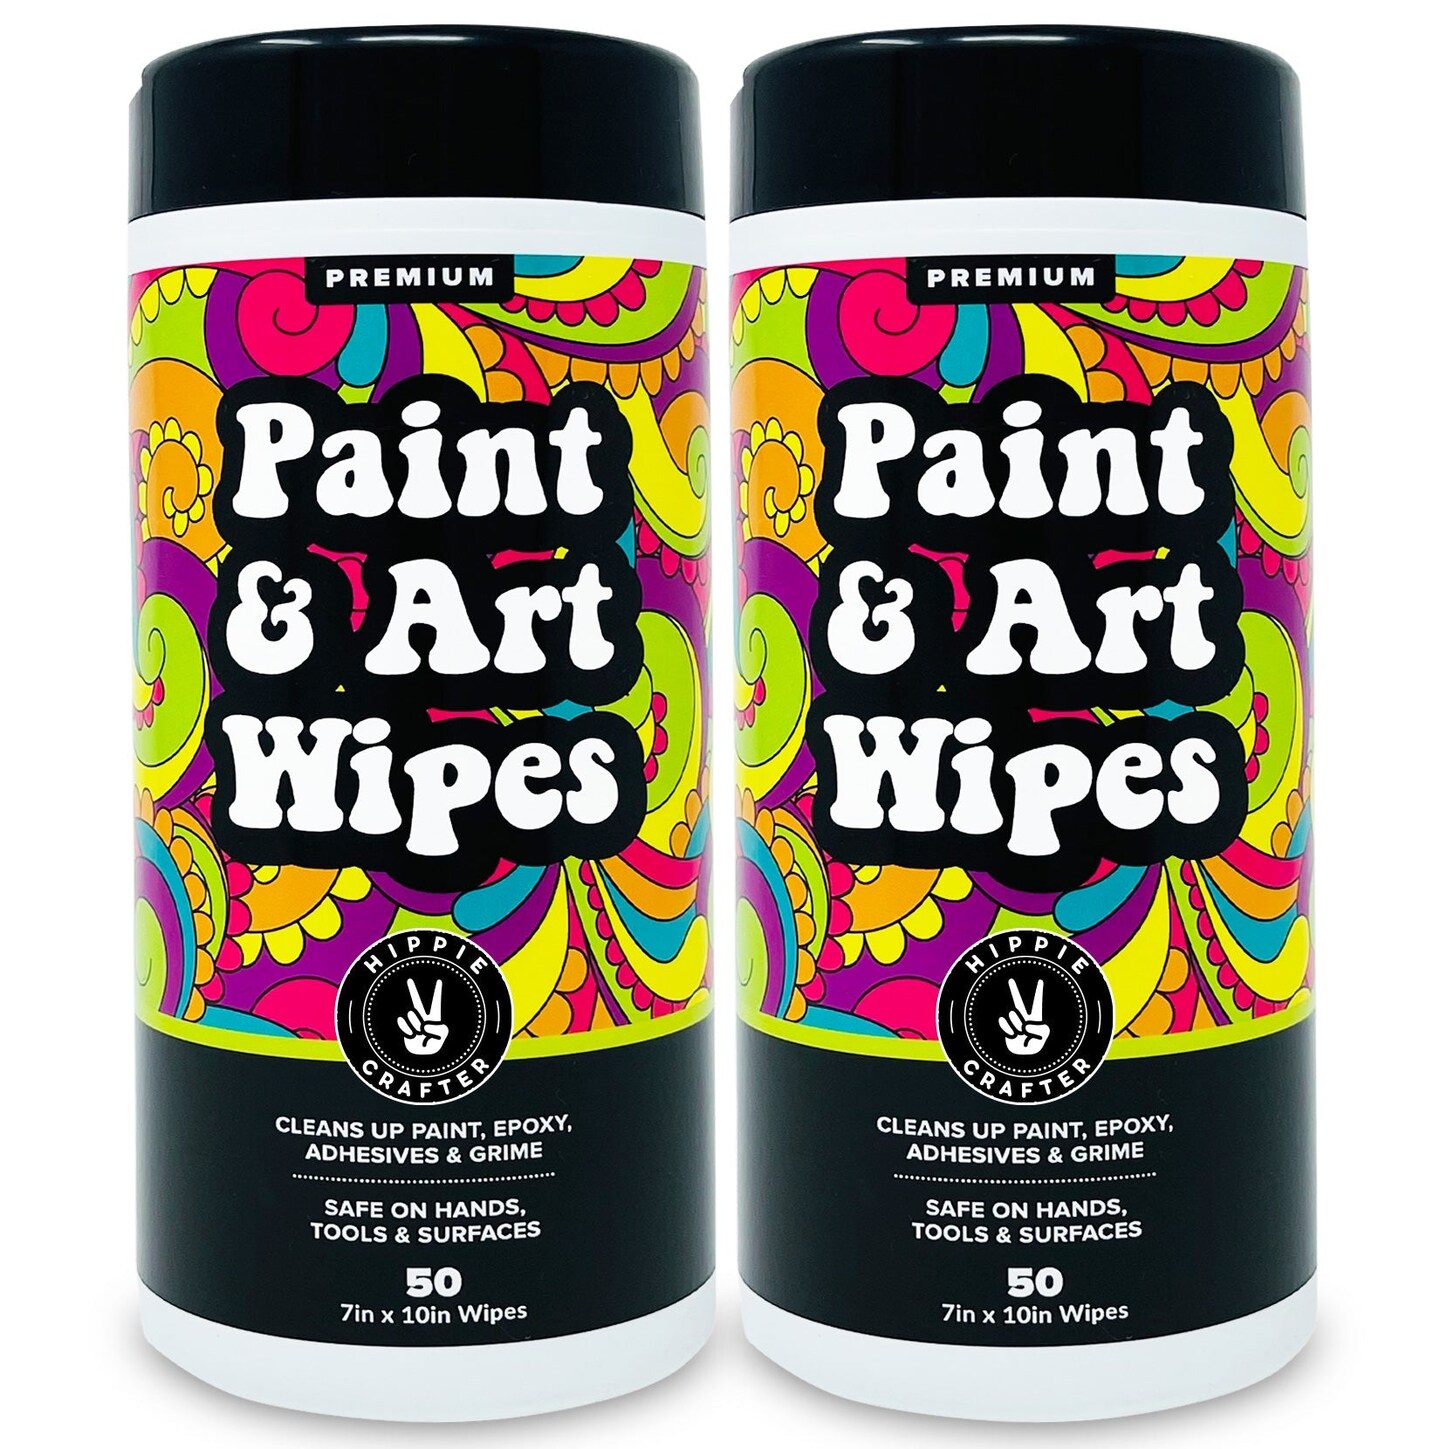 Paint &#x26; Art Wipes Paint Remover Wipes Cleaner Epoxy Glue Stains Latex, Acrylic Hand Cleaner and Plastic, Metal or Wood Surfaces, Floors, Brushes, Flat Paint Heavy Duty Cleaning